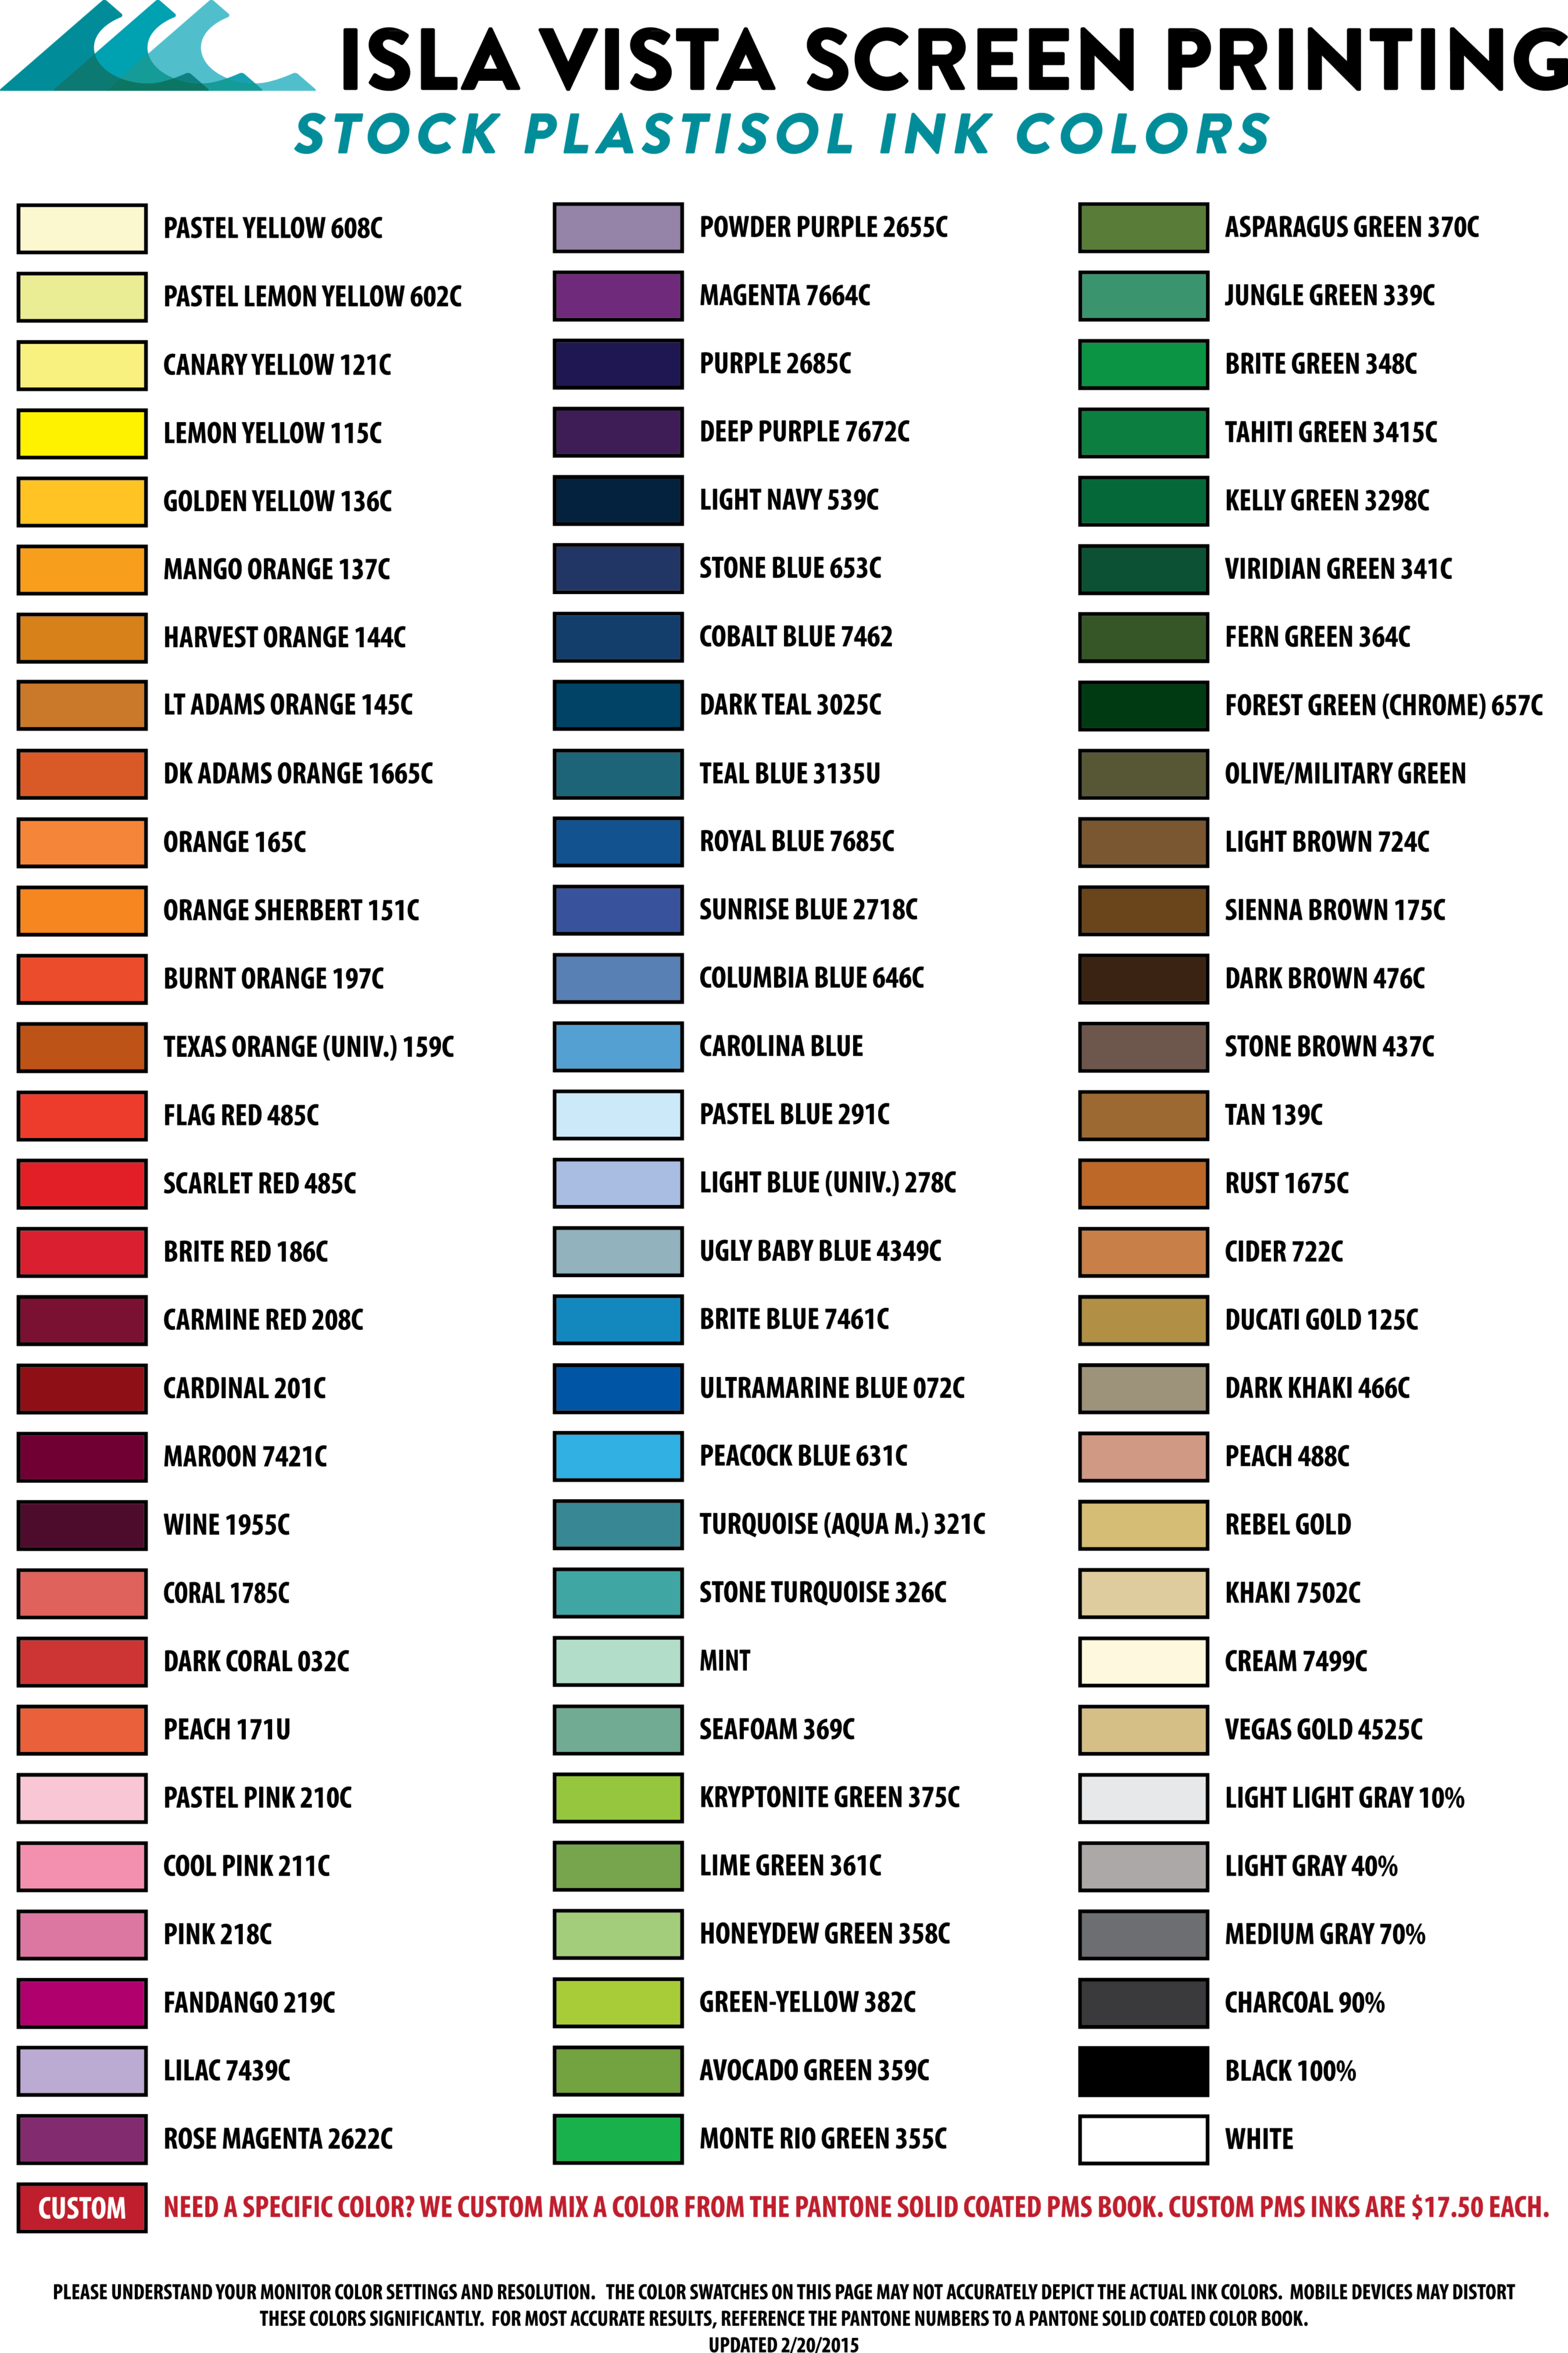 Screen Printing Ink Color Chart